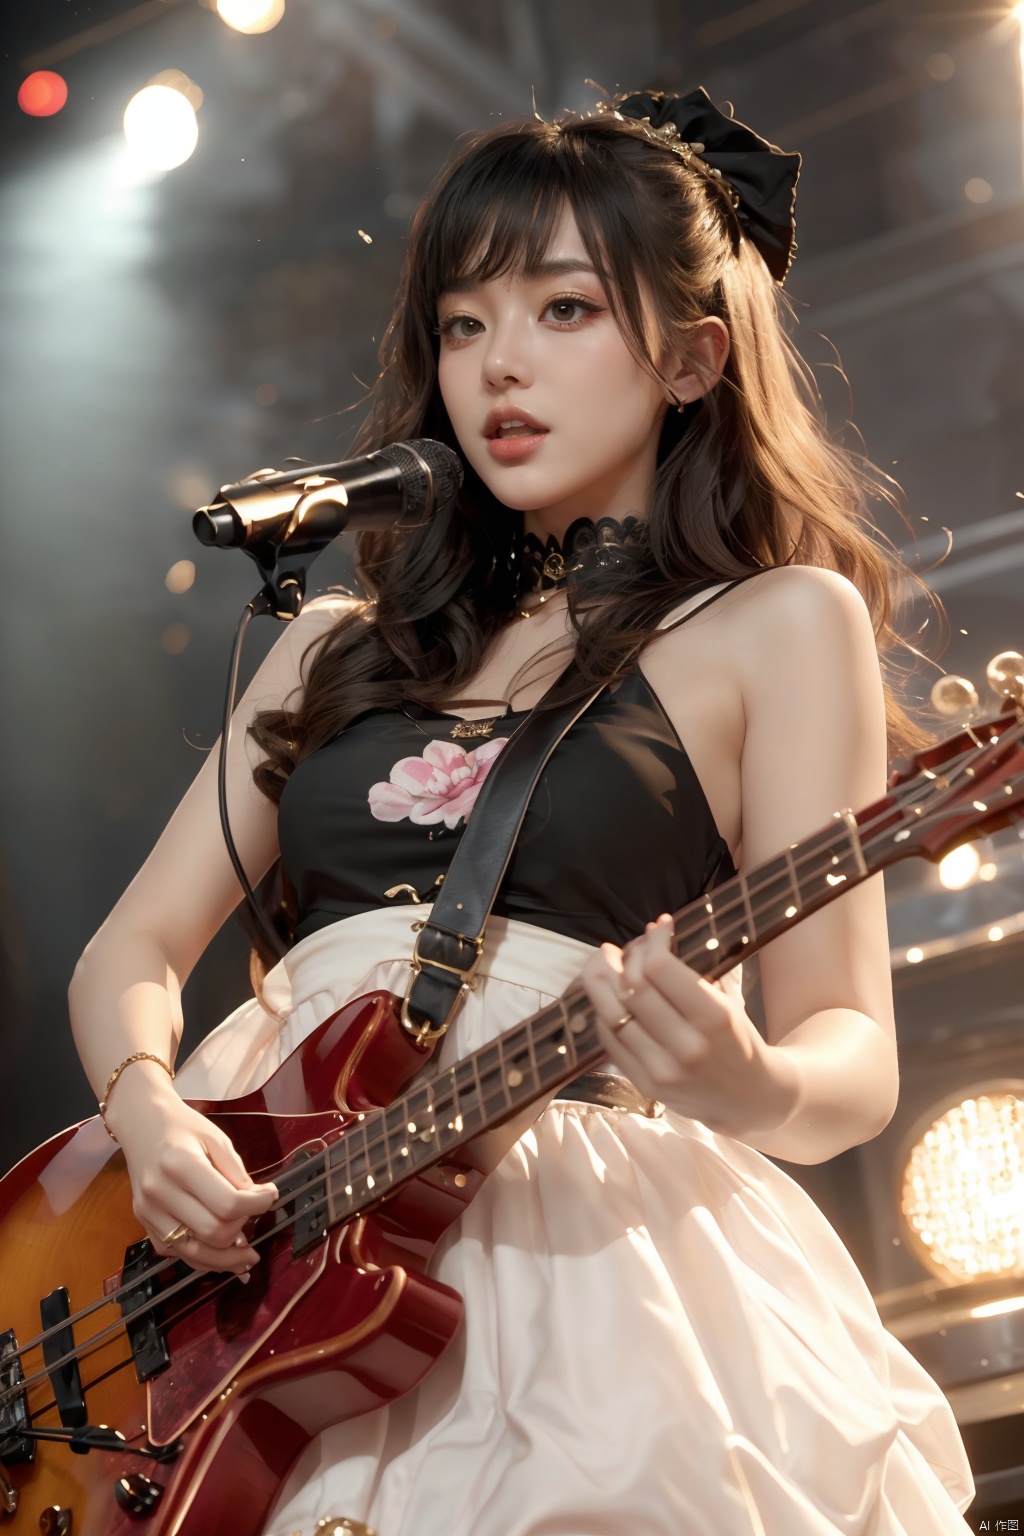  1 girl，solo, blone hair, long hair, punk dress, pretty beautiful makeup, stage, microphone, bass,singing